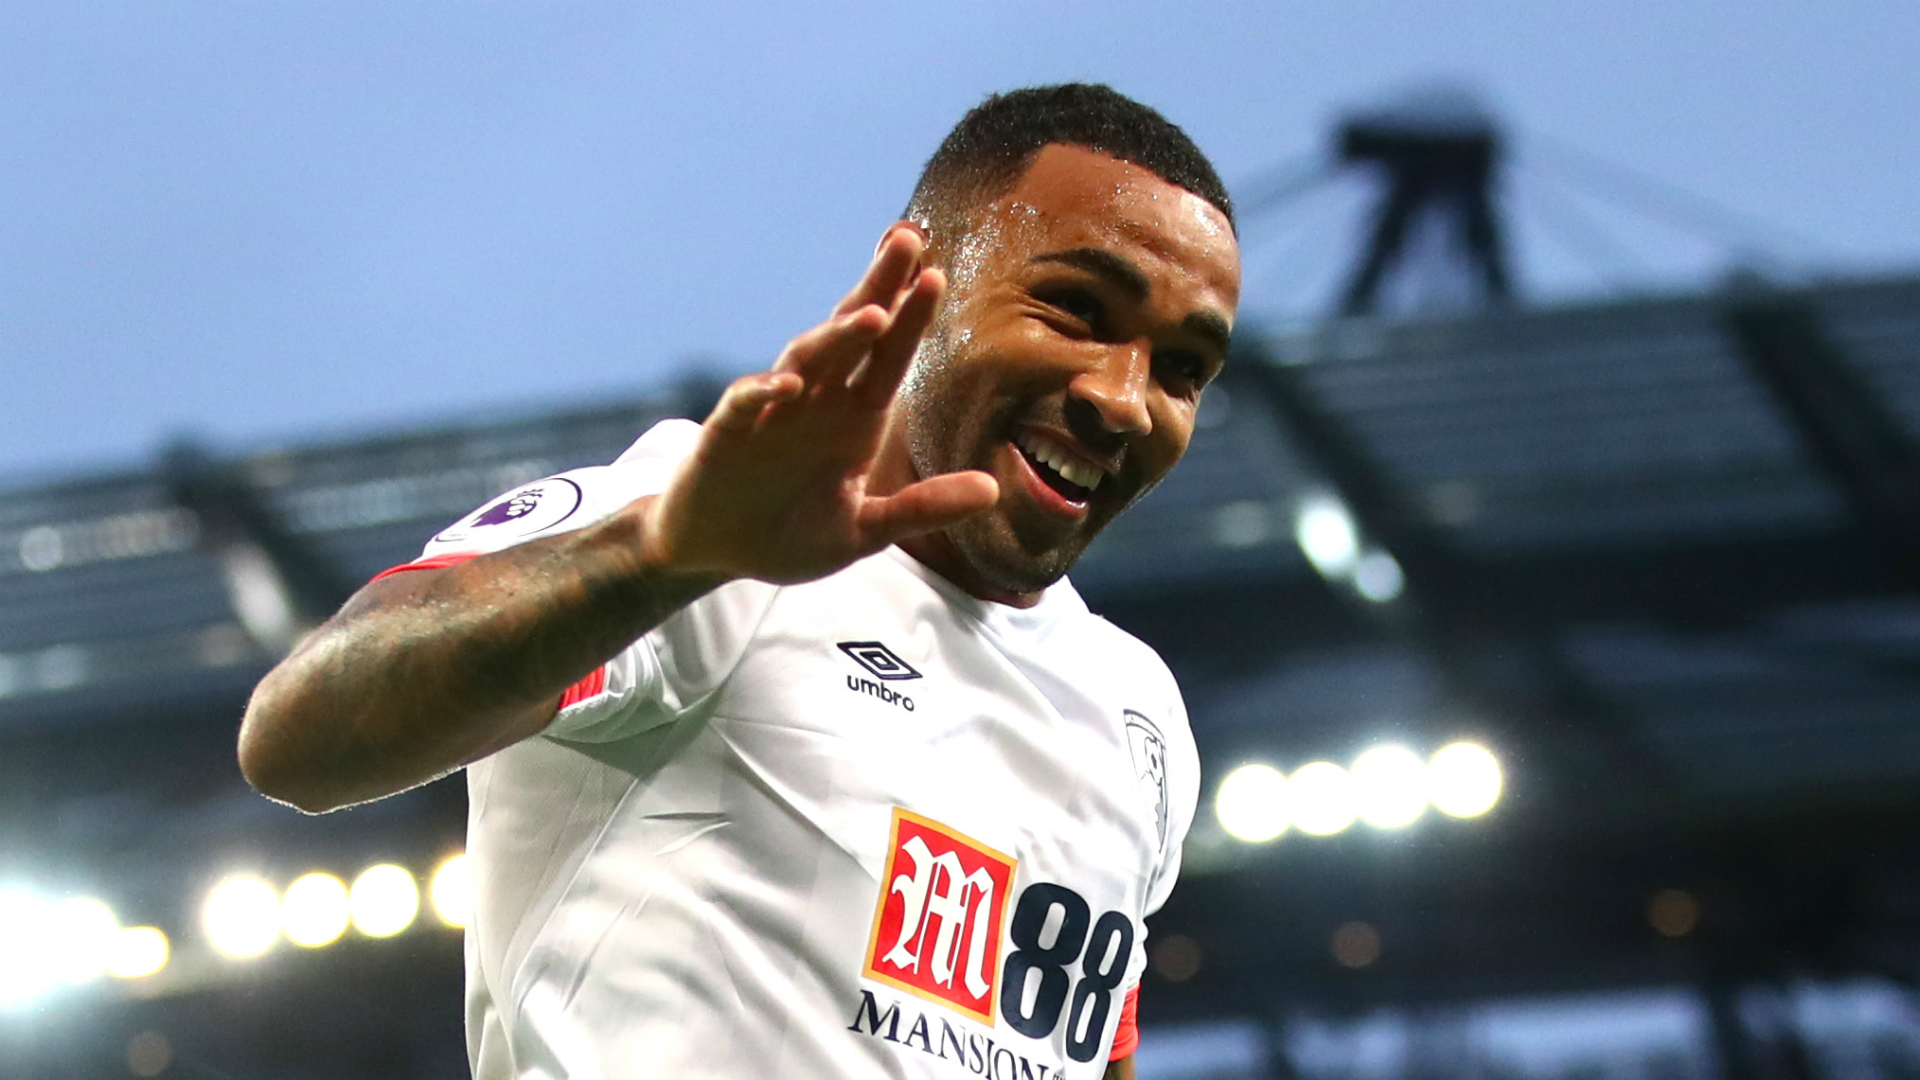 Chelsea confirmed their interest in England striker Callum Wilson, but Bournemouth boss Eddie Howe says the club has had no offers.